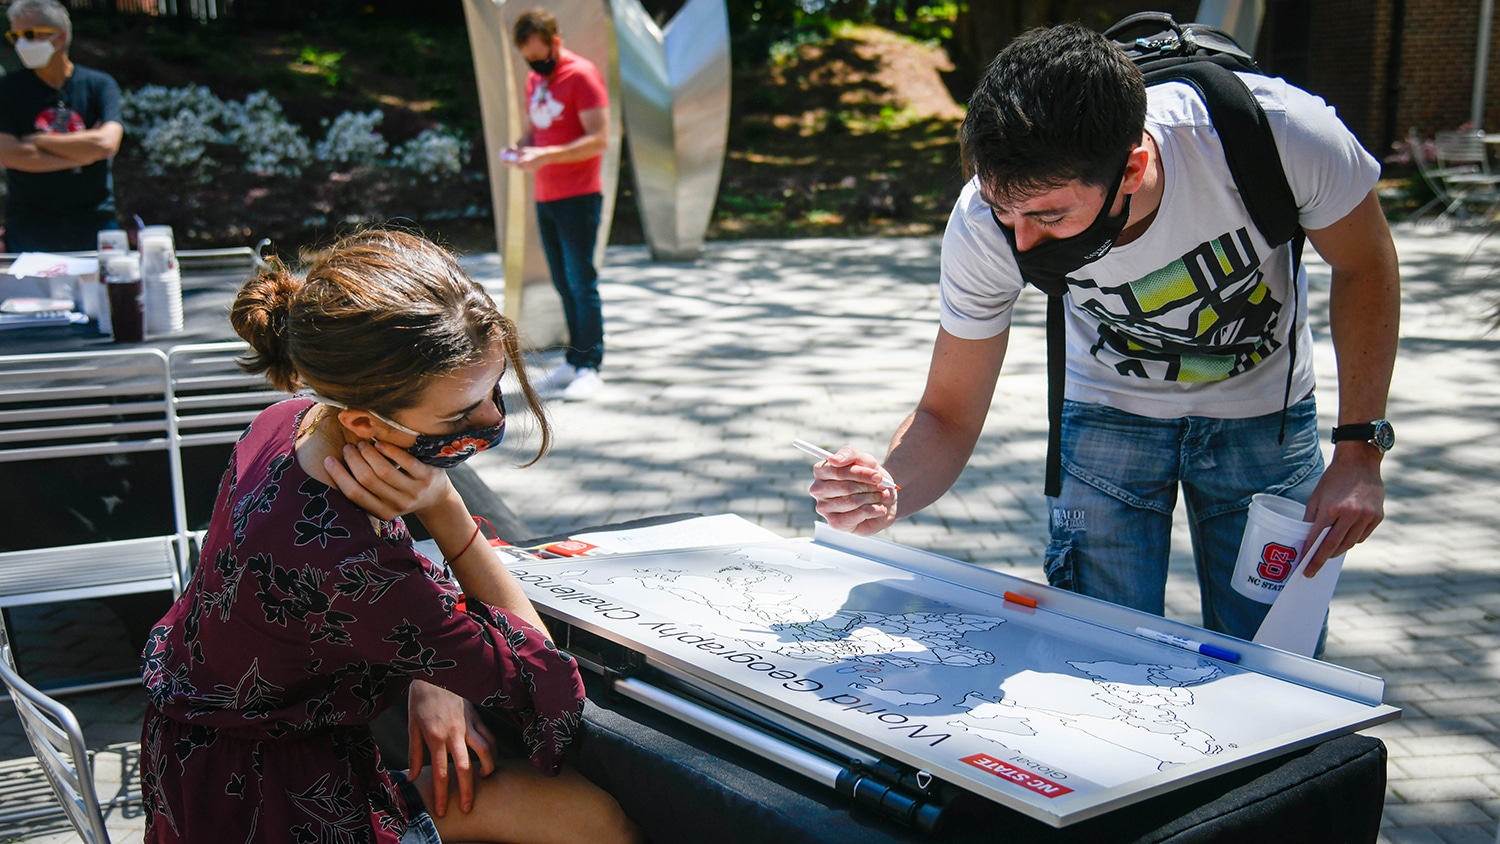 A male student marks his hometown on a map of the world as a female student looks on.